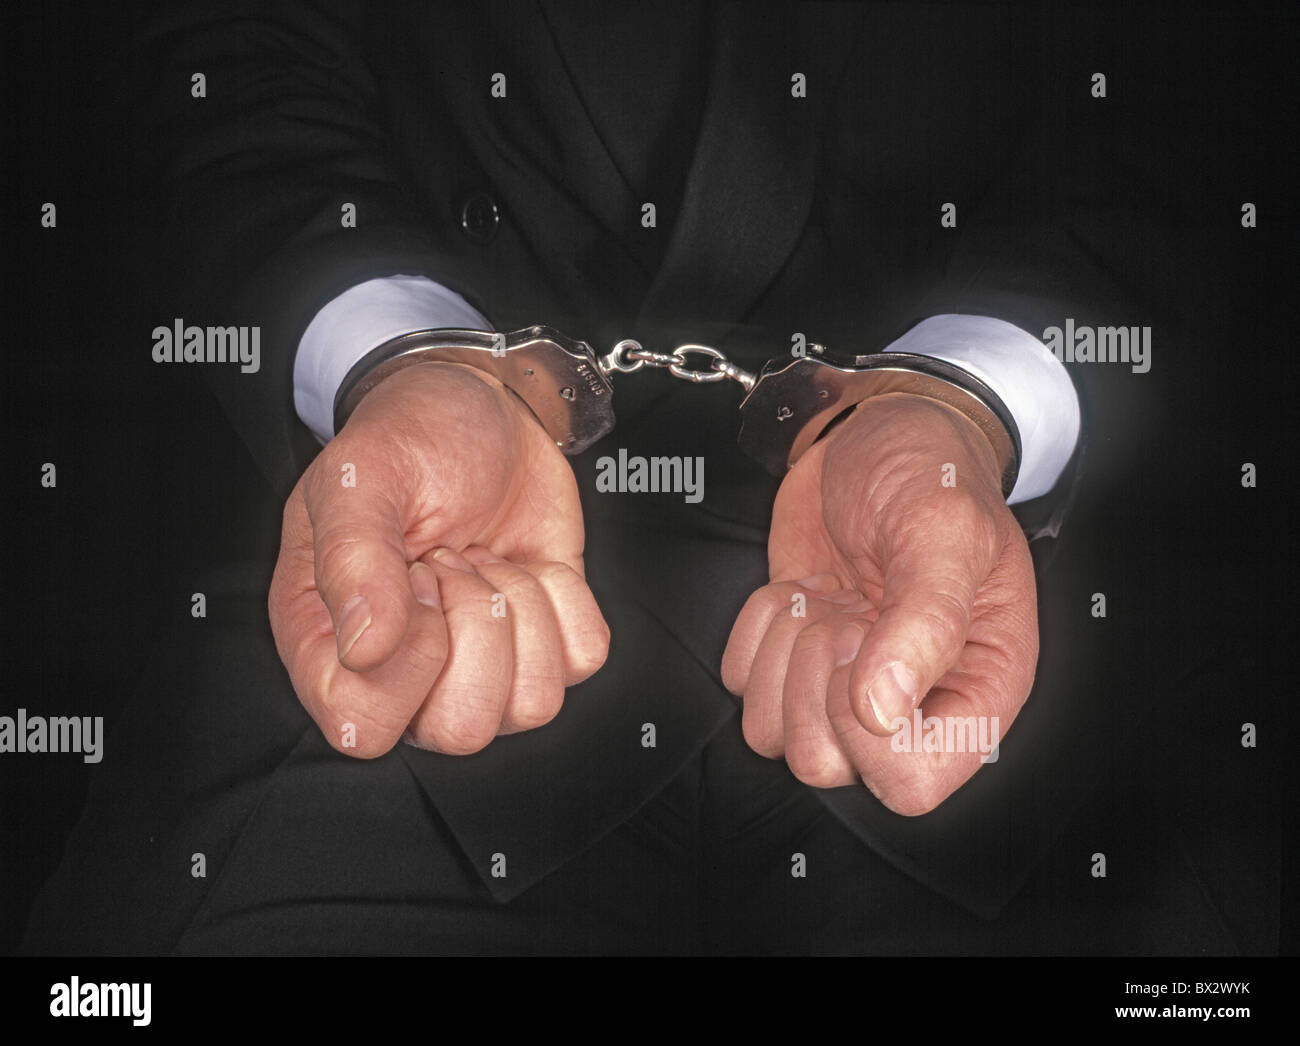 Business Business Metaphors Caucasian Concepts Convicted Crime Criminal Finance Fraud Hand Hand cuffs Handc Stock Photo